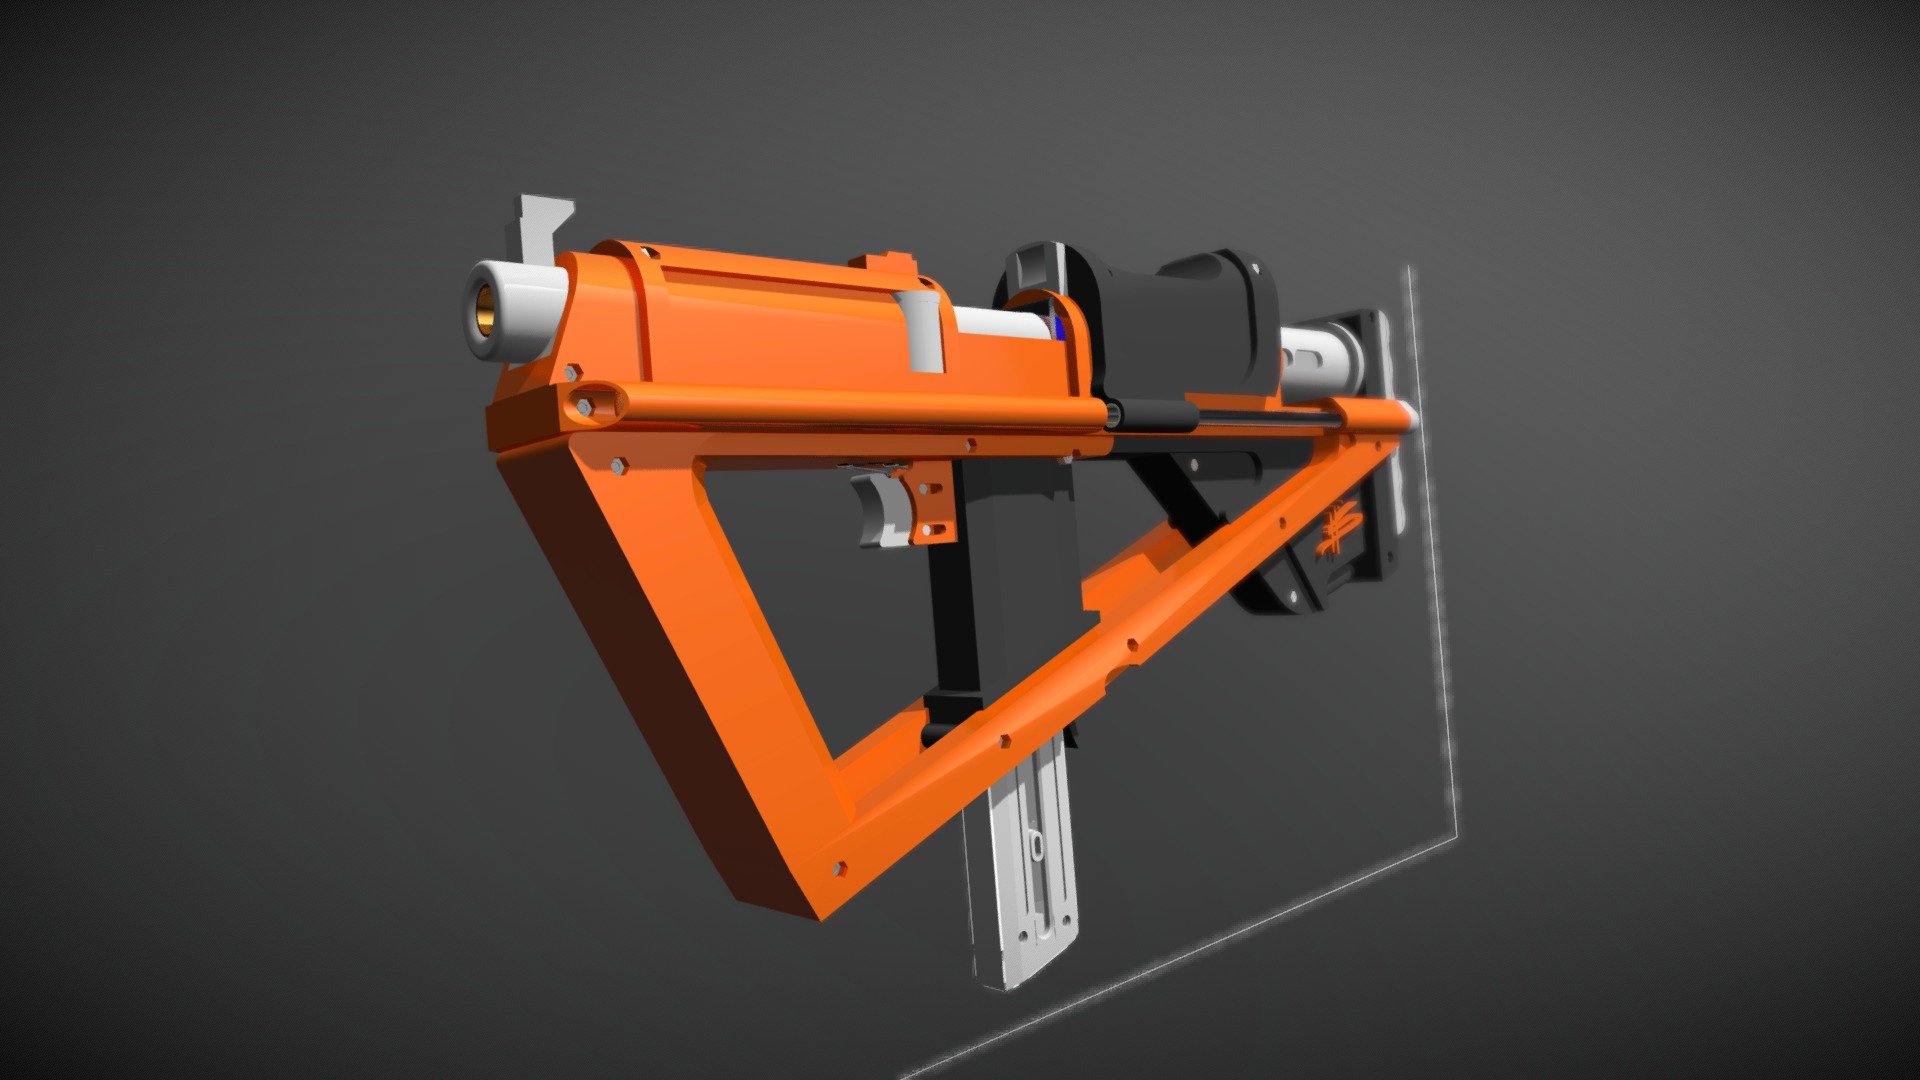 Based on design by HotKoin that can be found here: https://www.reddit.com/r/Nerf/comments/ivoy32/just_a_simple_magingrip_carbine/

The original blaster was a springer but by popular demand i designed a solenoid based semiauto flywheel powered blaster, built from the ground up to retain the aesthetics of the original design.

Features a custom flywheel cage, two stage trigger system, lipo cage, katana compatible ingrip magwell and collapsible stock (the original design used the top part as a priming handle but was converted to a stock)

This is in progress and volunteers for printing are needed to refine the design!!!
Get the files for printing here: https://www.thingiverse.com/thing:4609526 - Triagon flywheel blaster - Download Free 3D model by wray2064 3d model